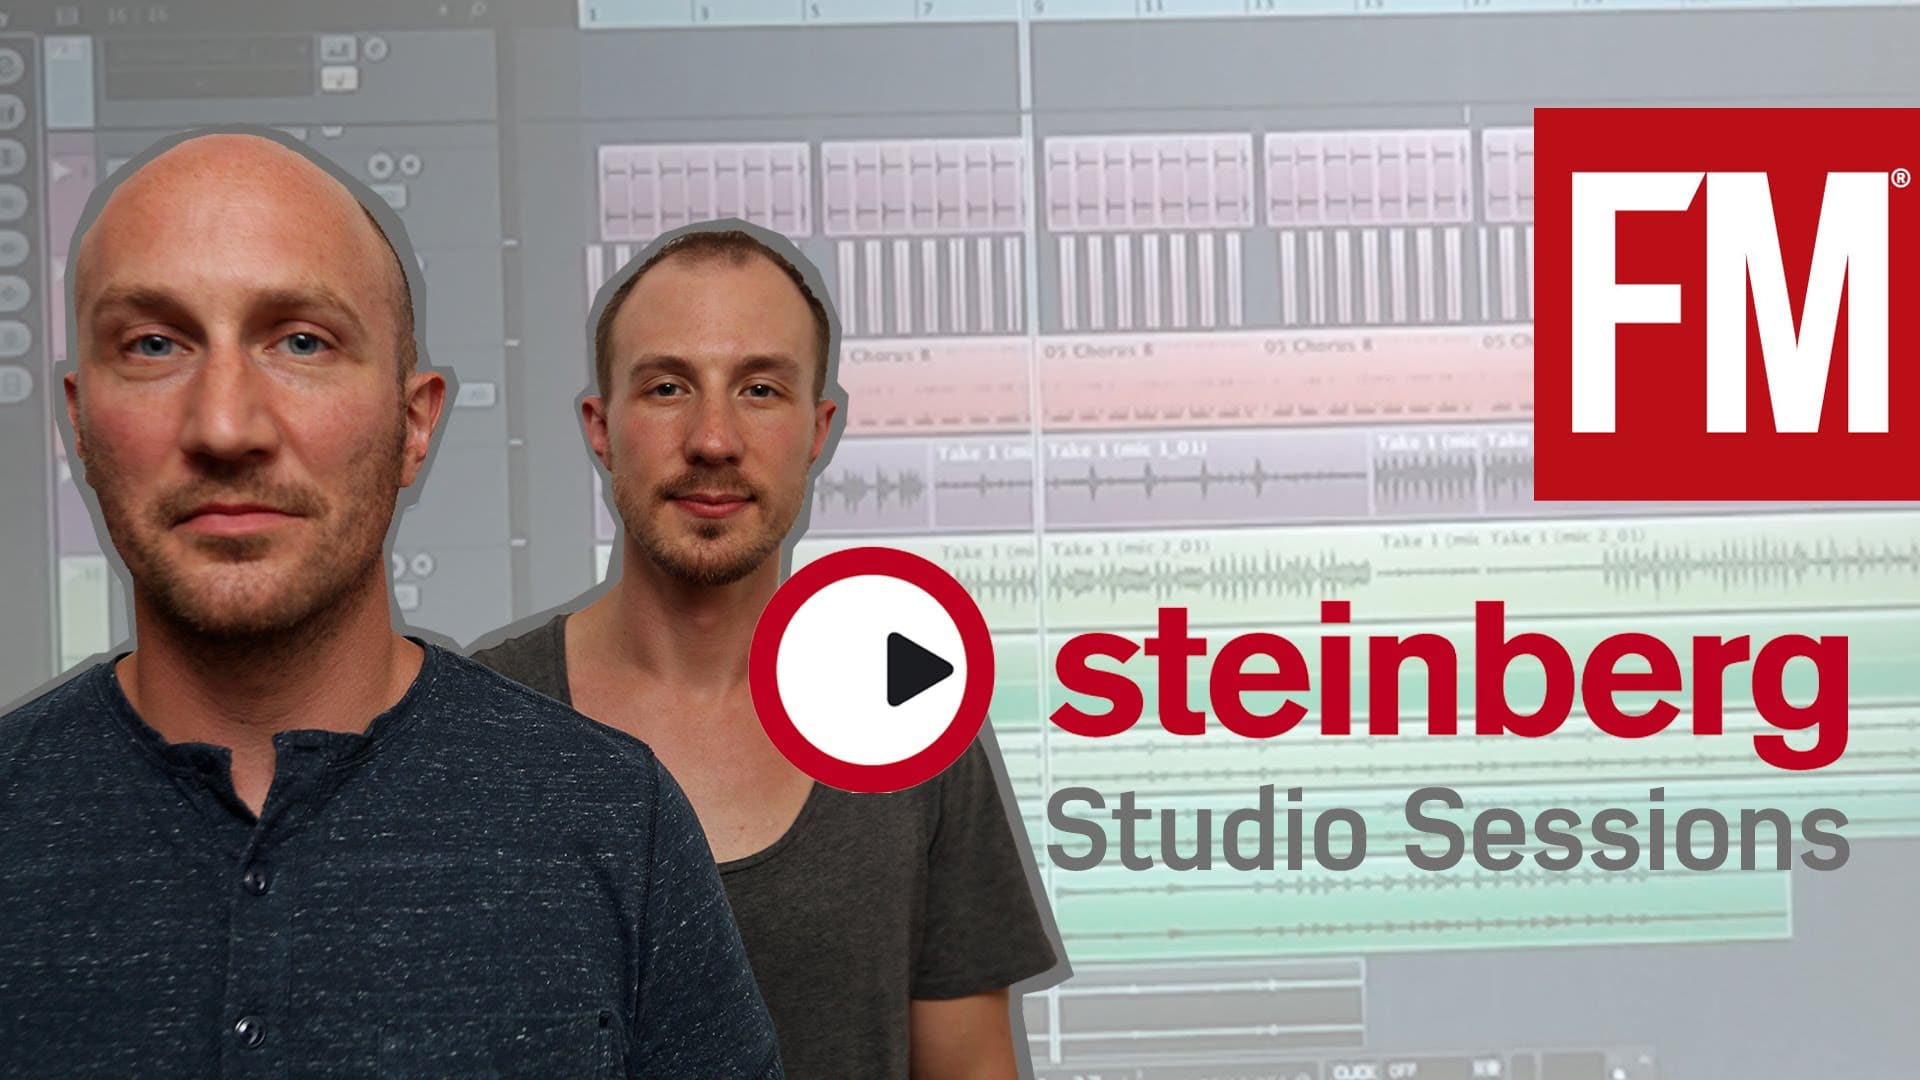 Steinberg Studio Sessions EP11 – Menace & Lord – YouTube